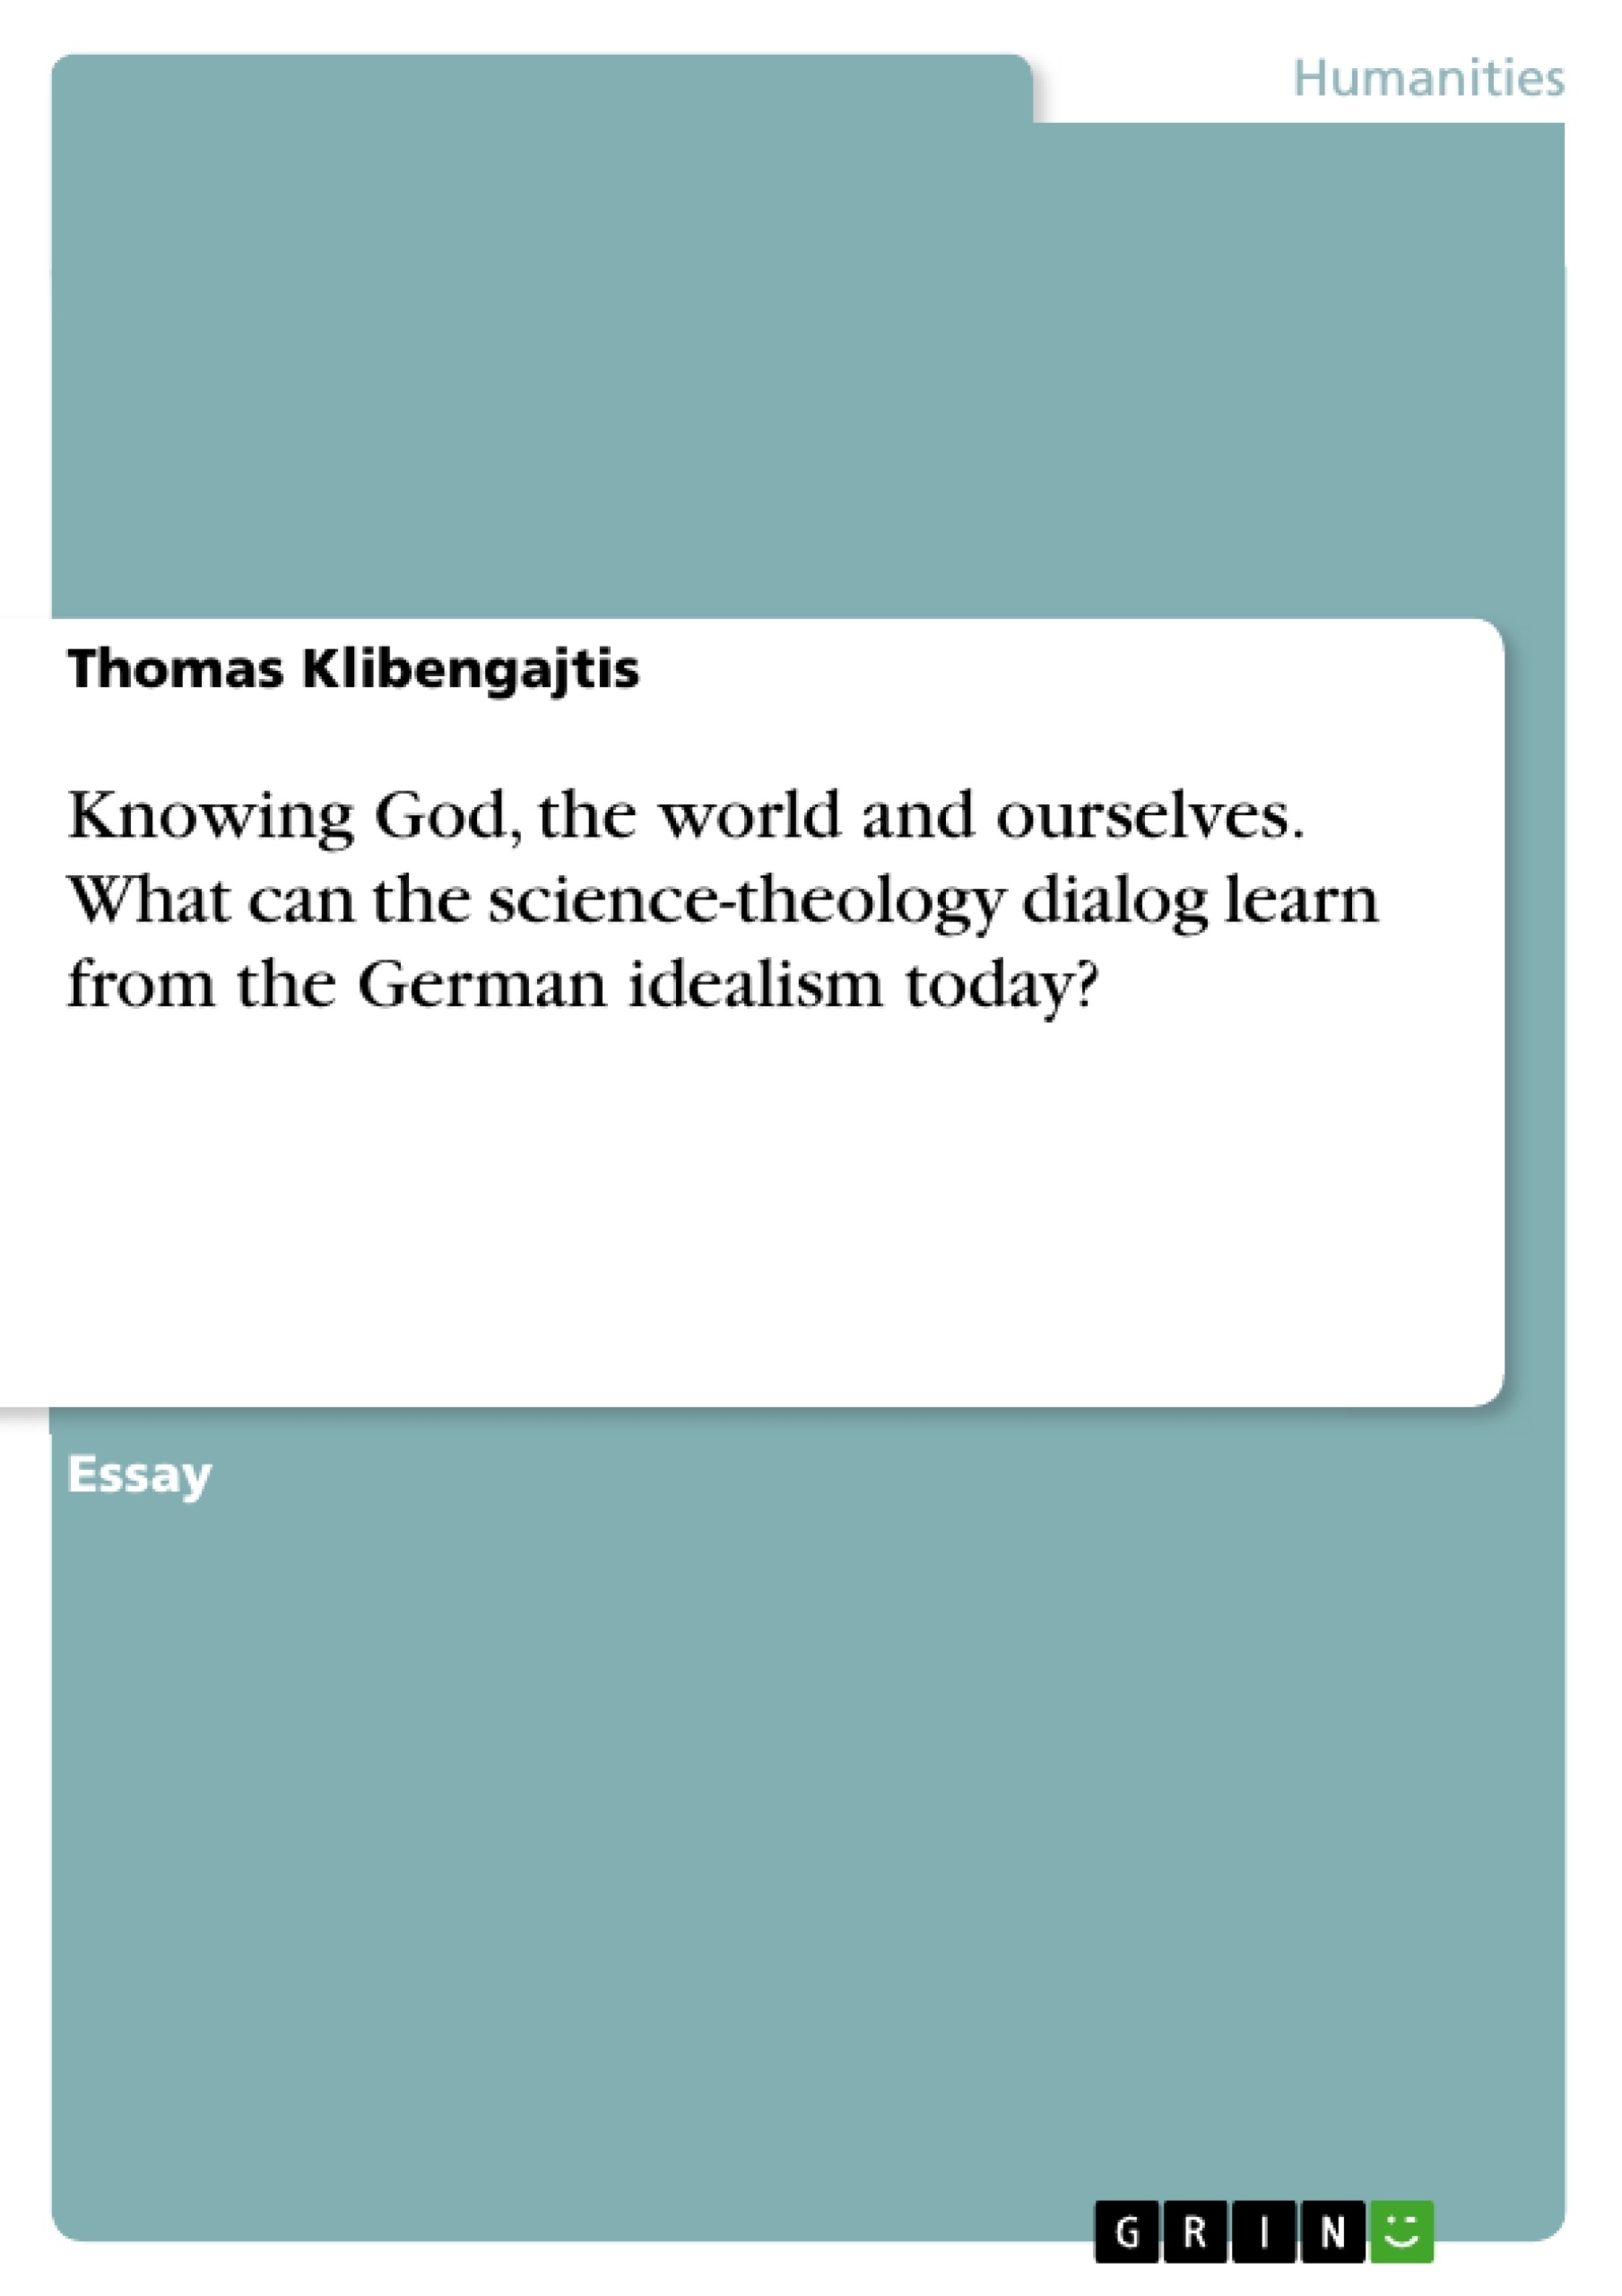 Title: Knowing God, the world and ourselves. What can the science-theology dialog learn from the German idealism today?